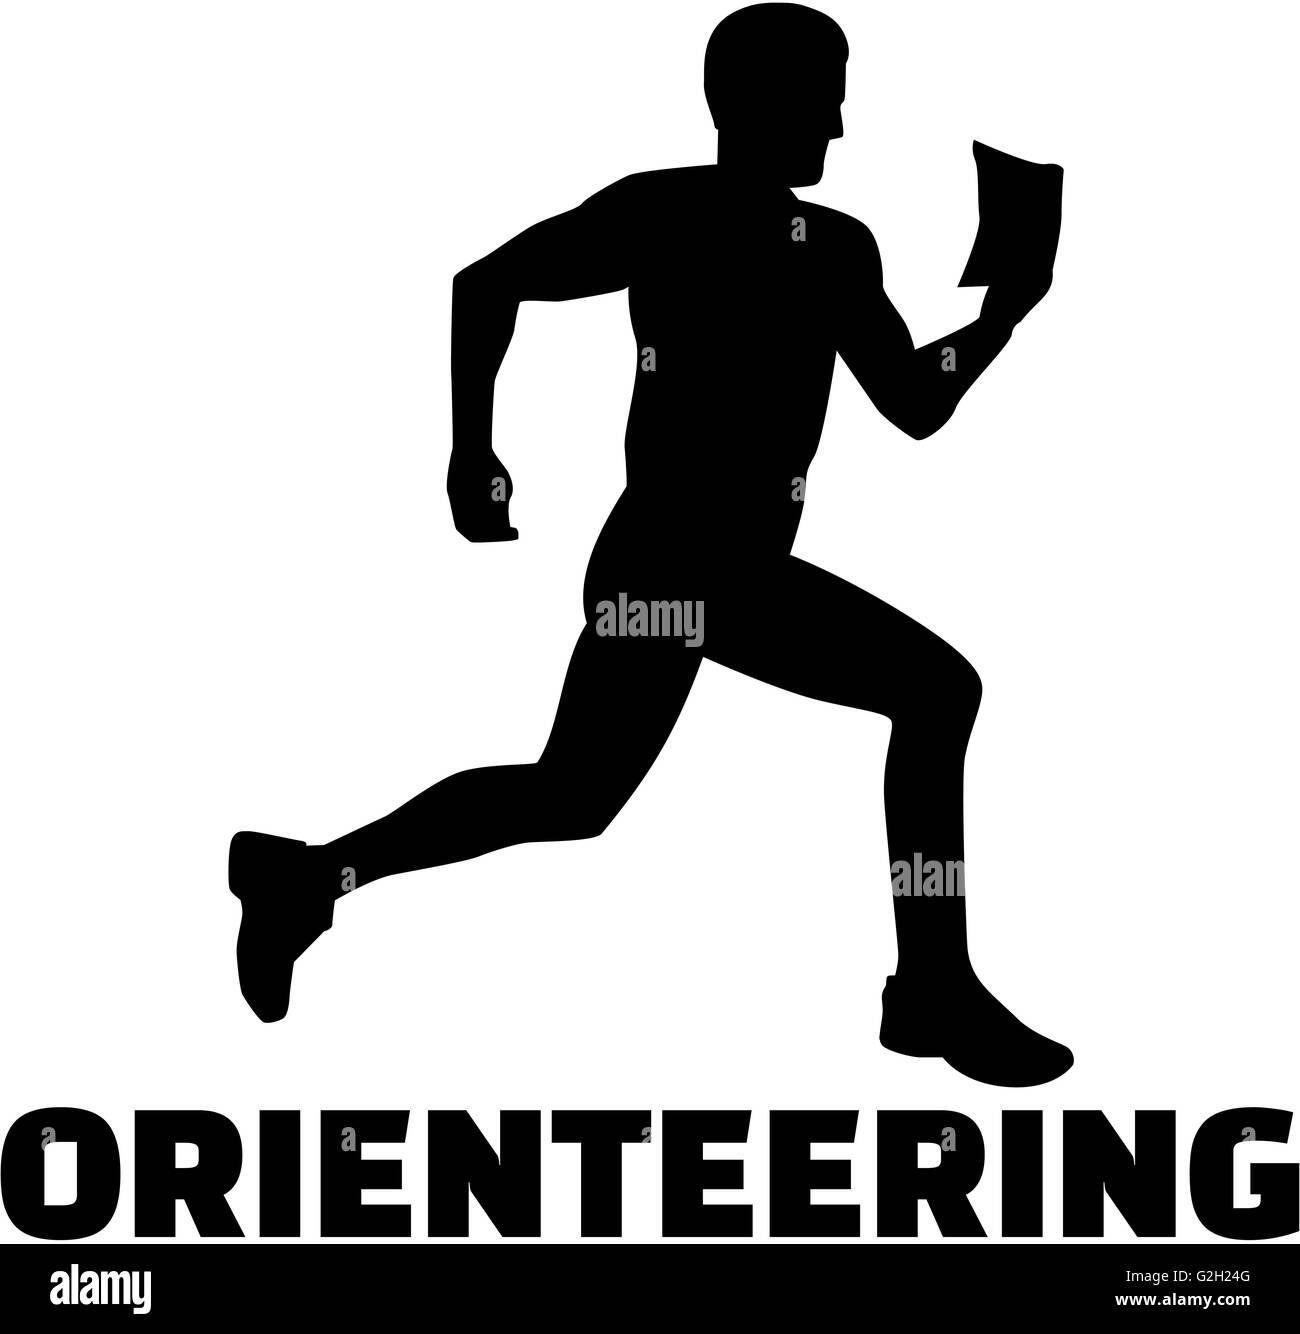 Orienteering silhouette with word Stock Photo